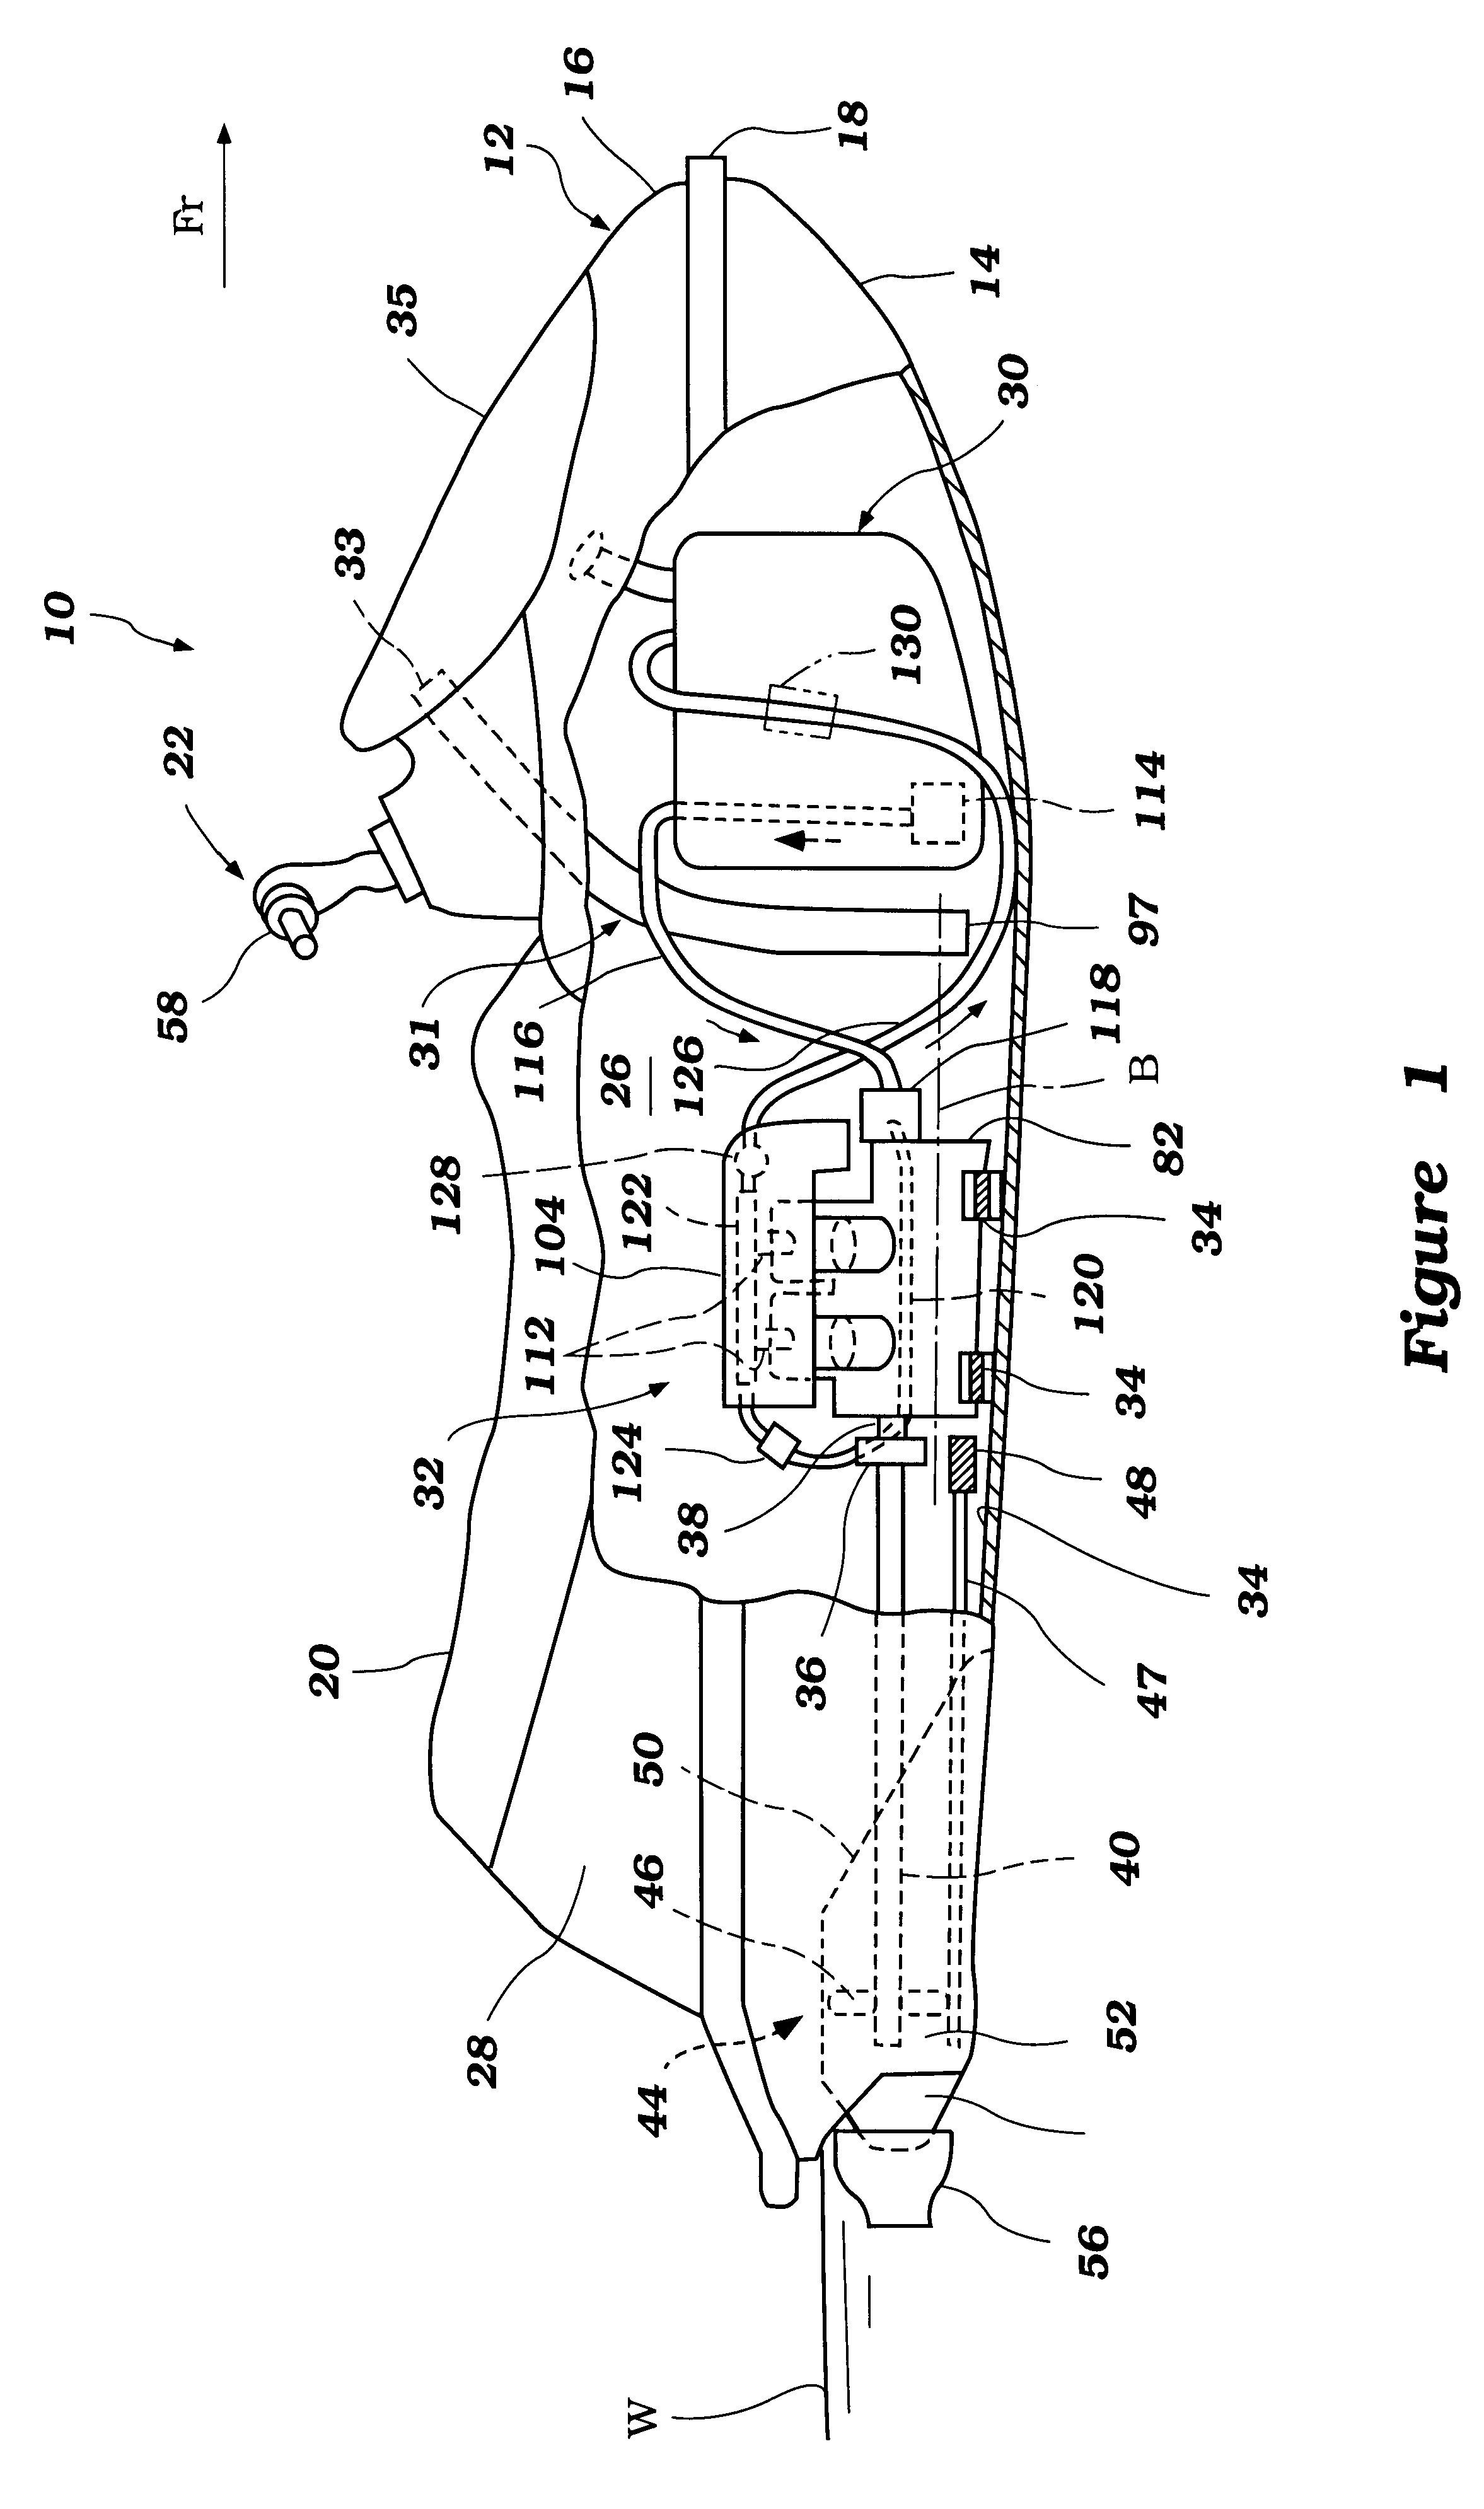 Fuel system and arrangement for small watercraft